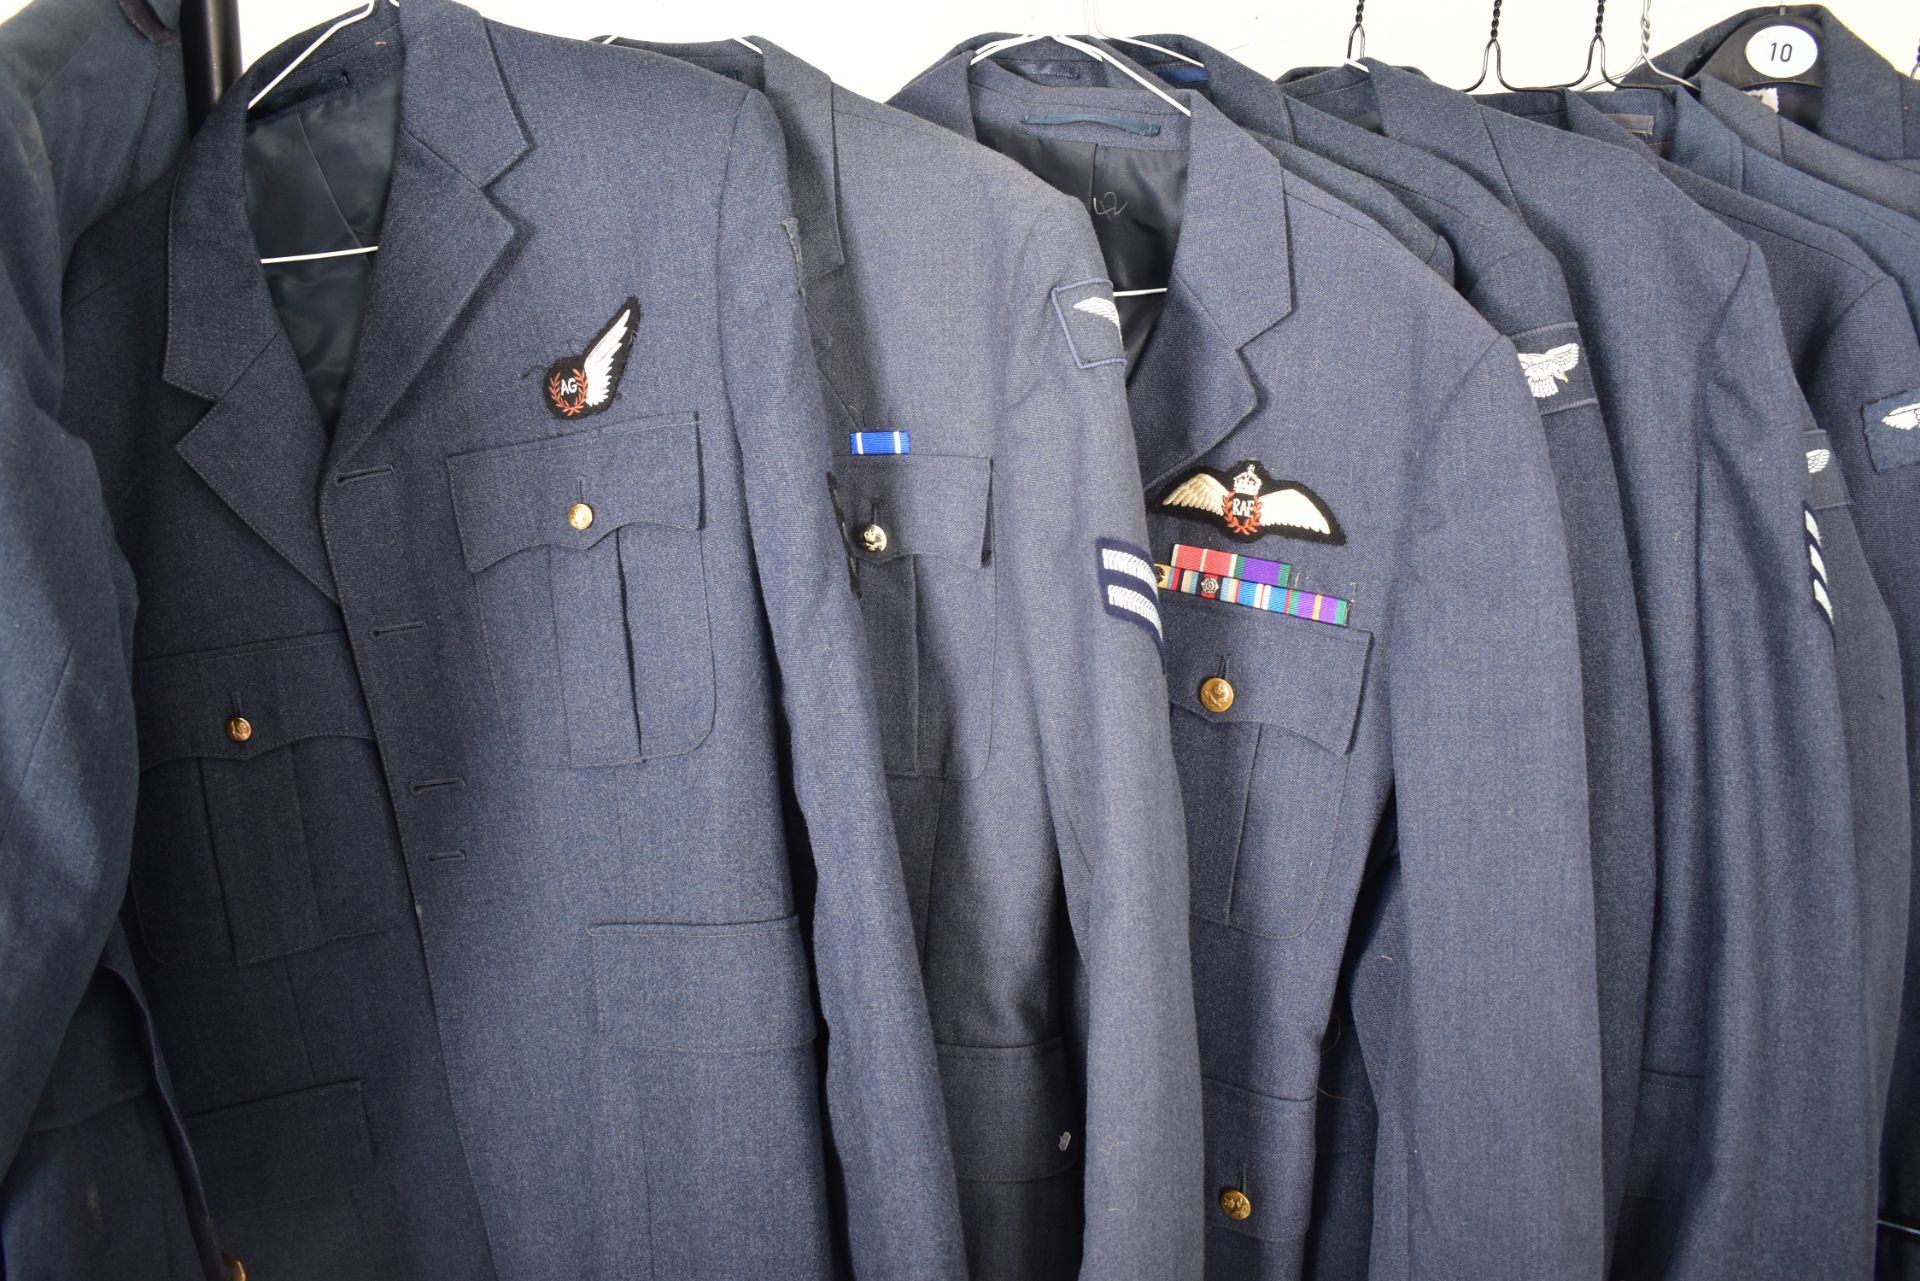 COLLECTION OF POST WAR RAF UNIFORM JACKETS - Image 3 of 6